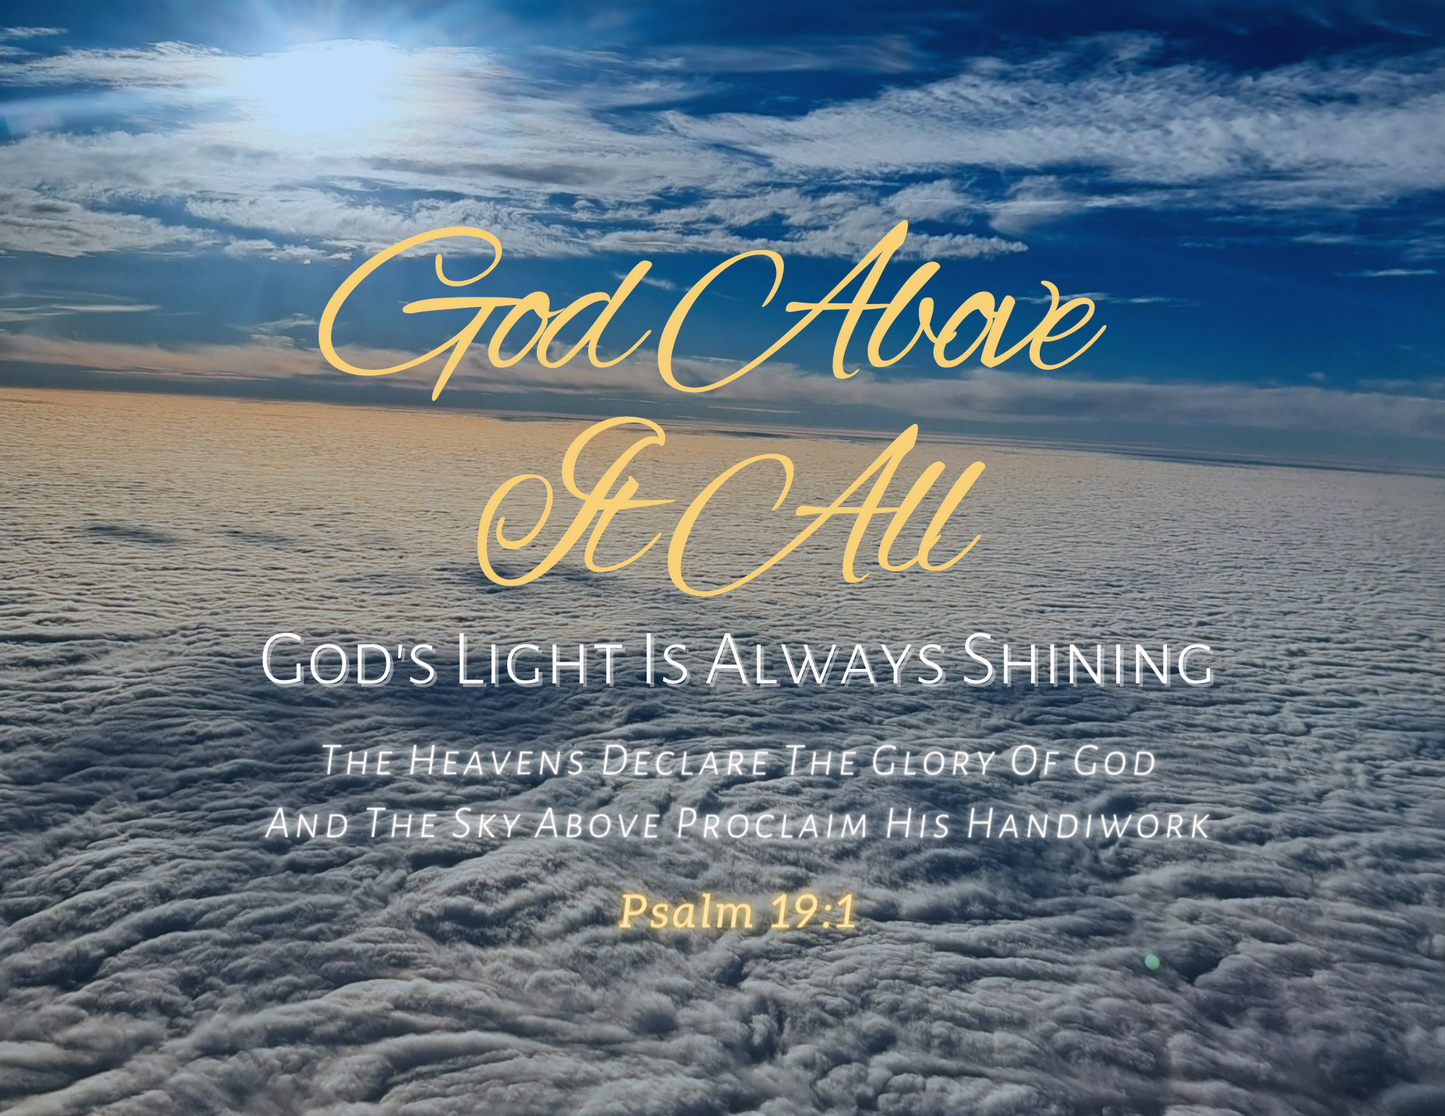 God Above It All - SCRIPTURE PICTURE Art Prints - UNFRAMED ON HIGH-QUALITY PHOTO PAPER.